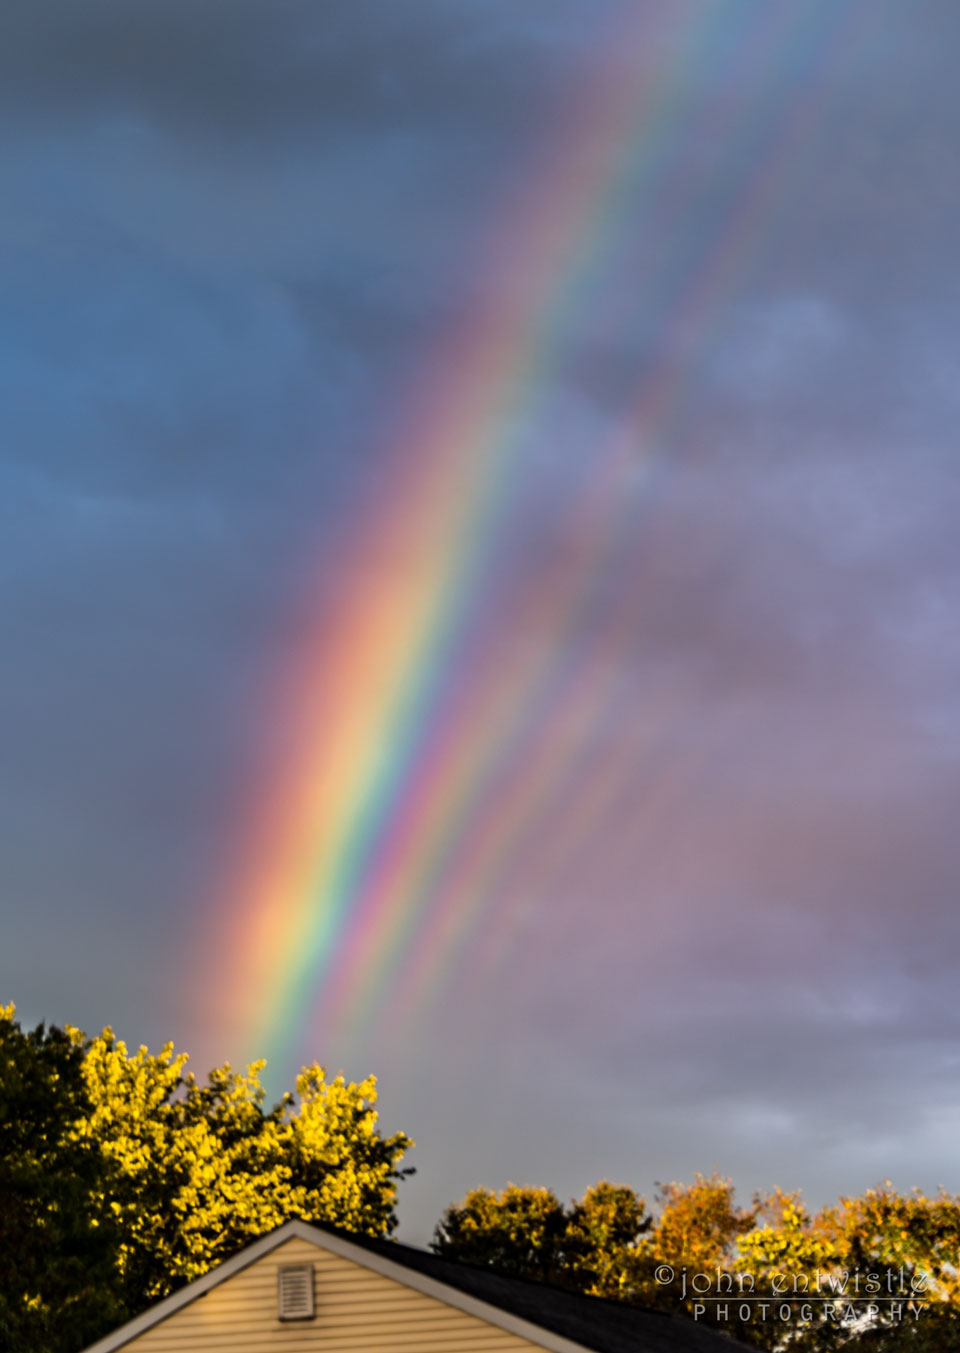 The featured image shows many parallel rainbow bands over 
a house with trees.
Please see the explanation for more detailed information.